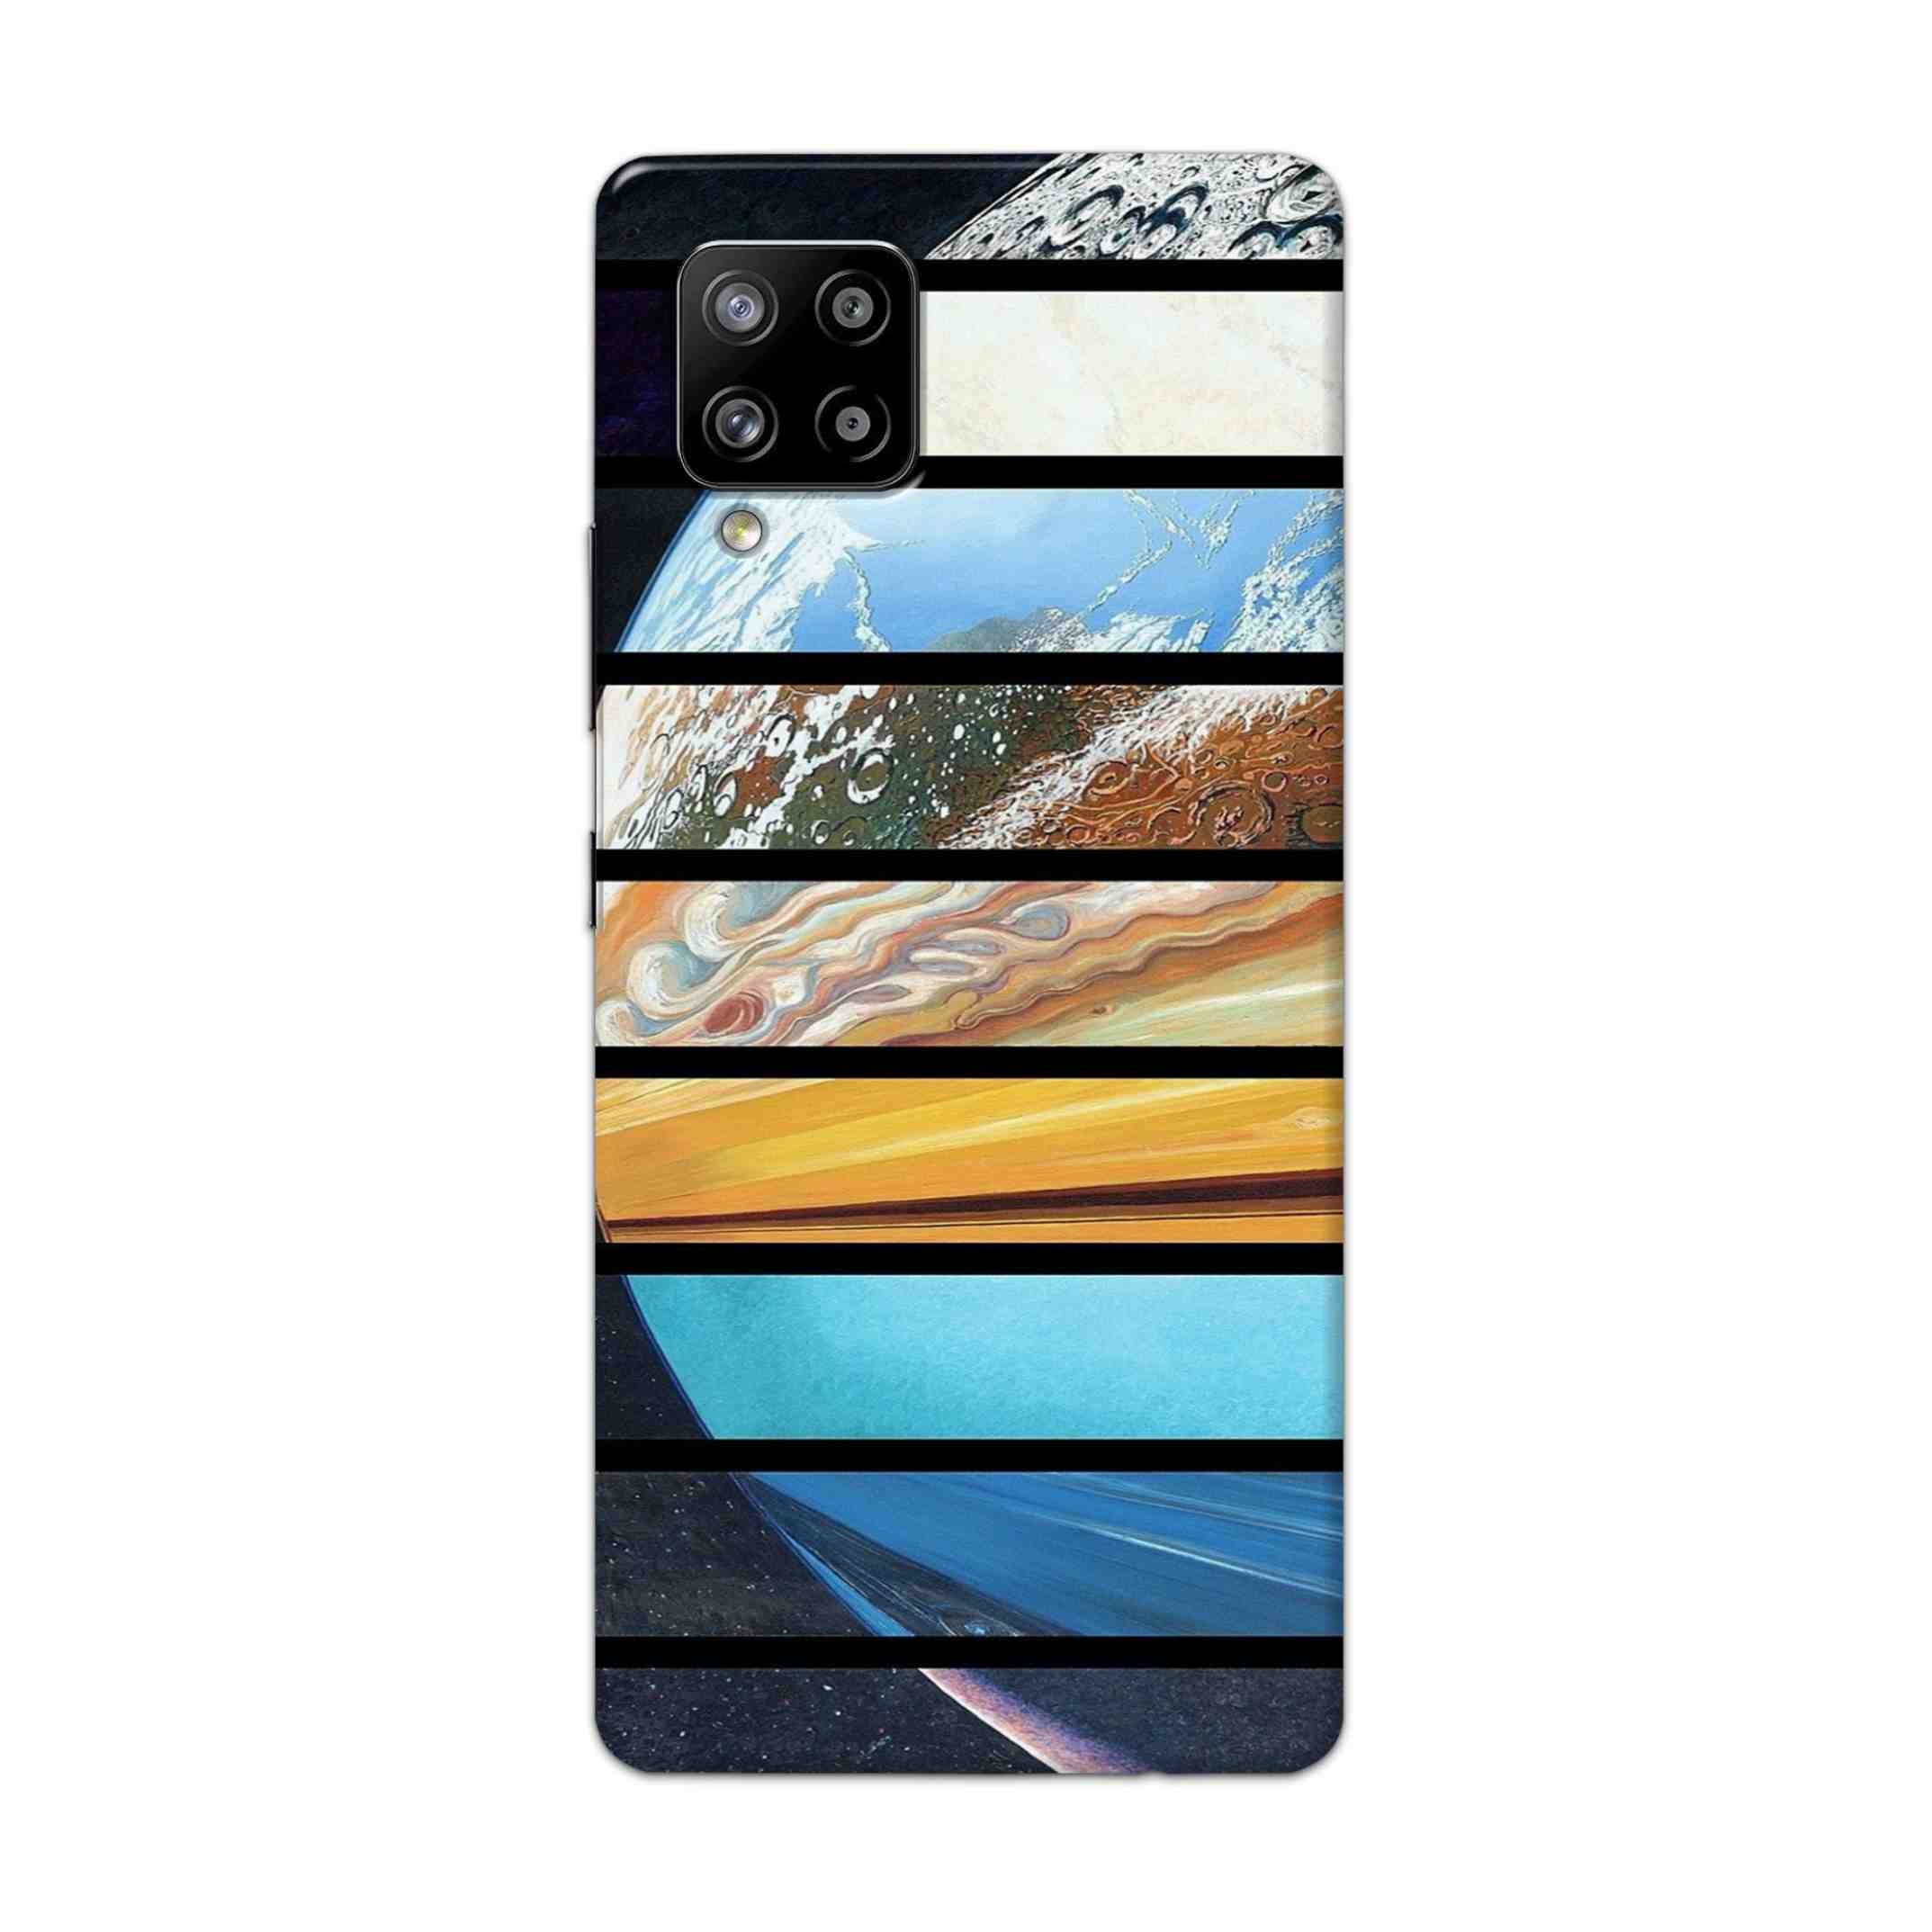 Buy Colourful Earth Hard Back Mobile Phone Case Cover For Samsung Galaxy M42 Online